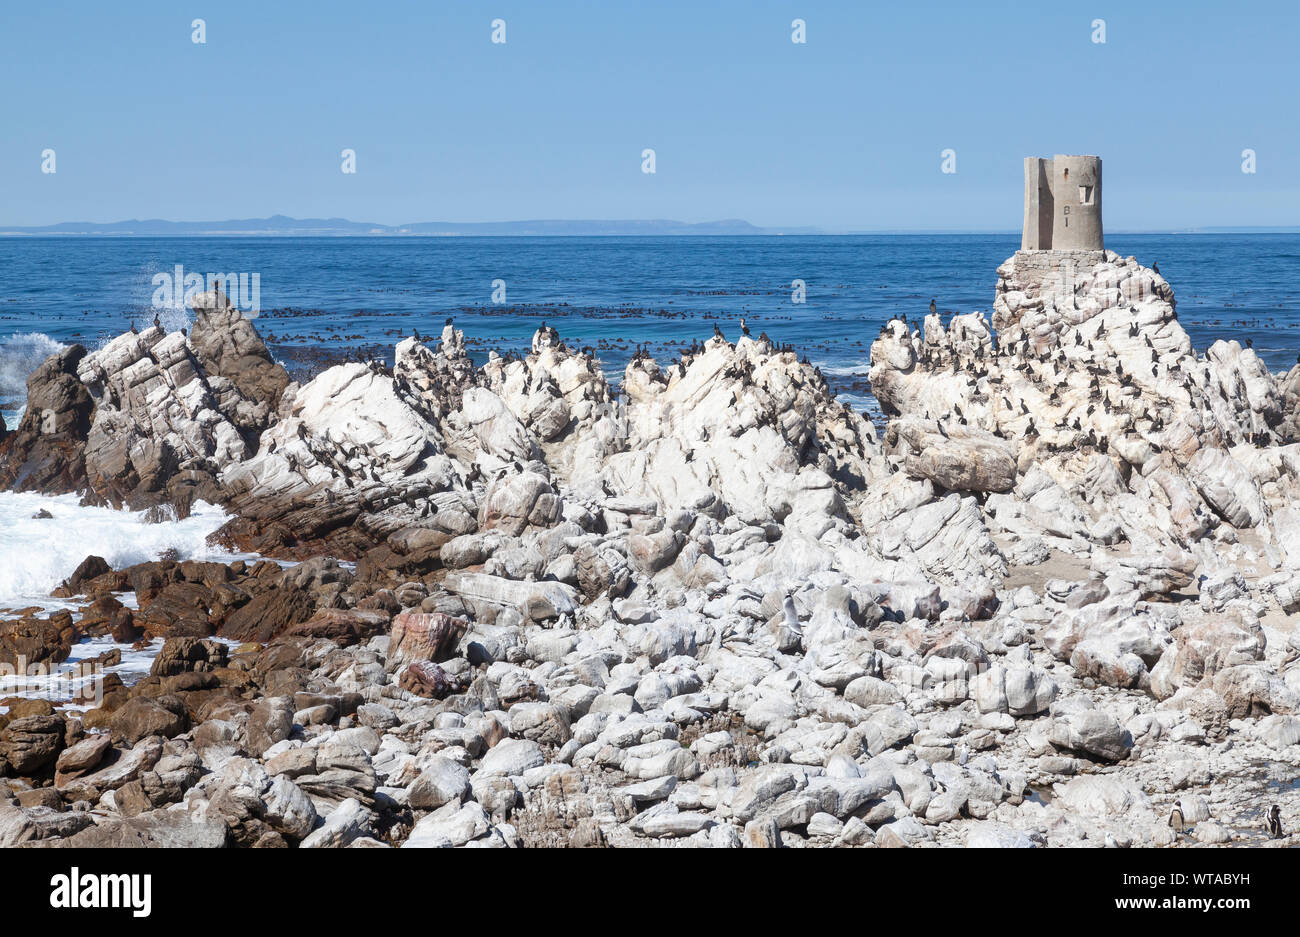 The Vulnerable African Penguin (Spheniscus demersus) and cormorant breeding colony at Stony Point Nature Reserve, Overberg, Western Cape, South Africa Stock Photo